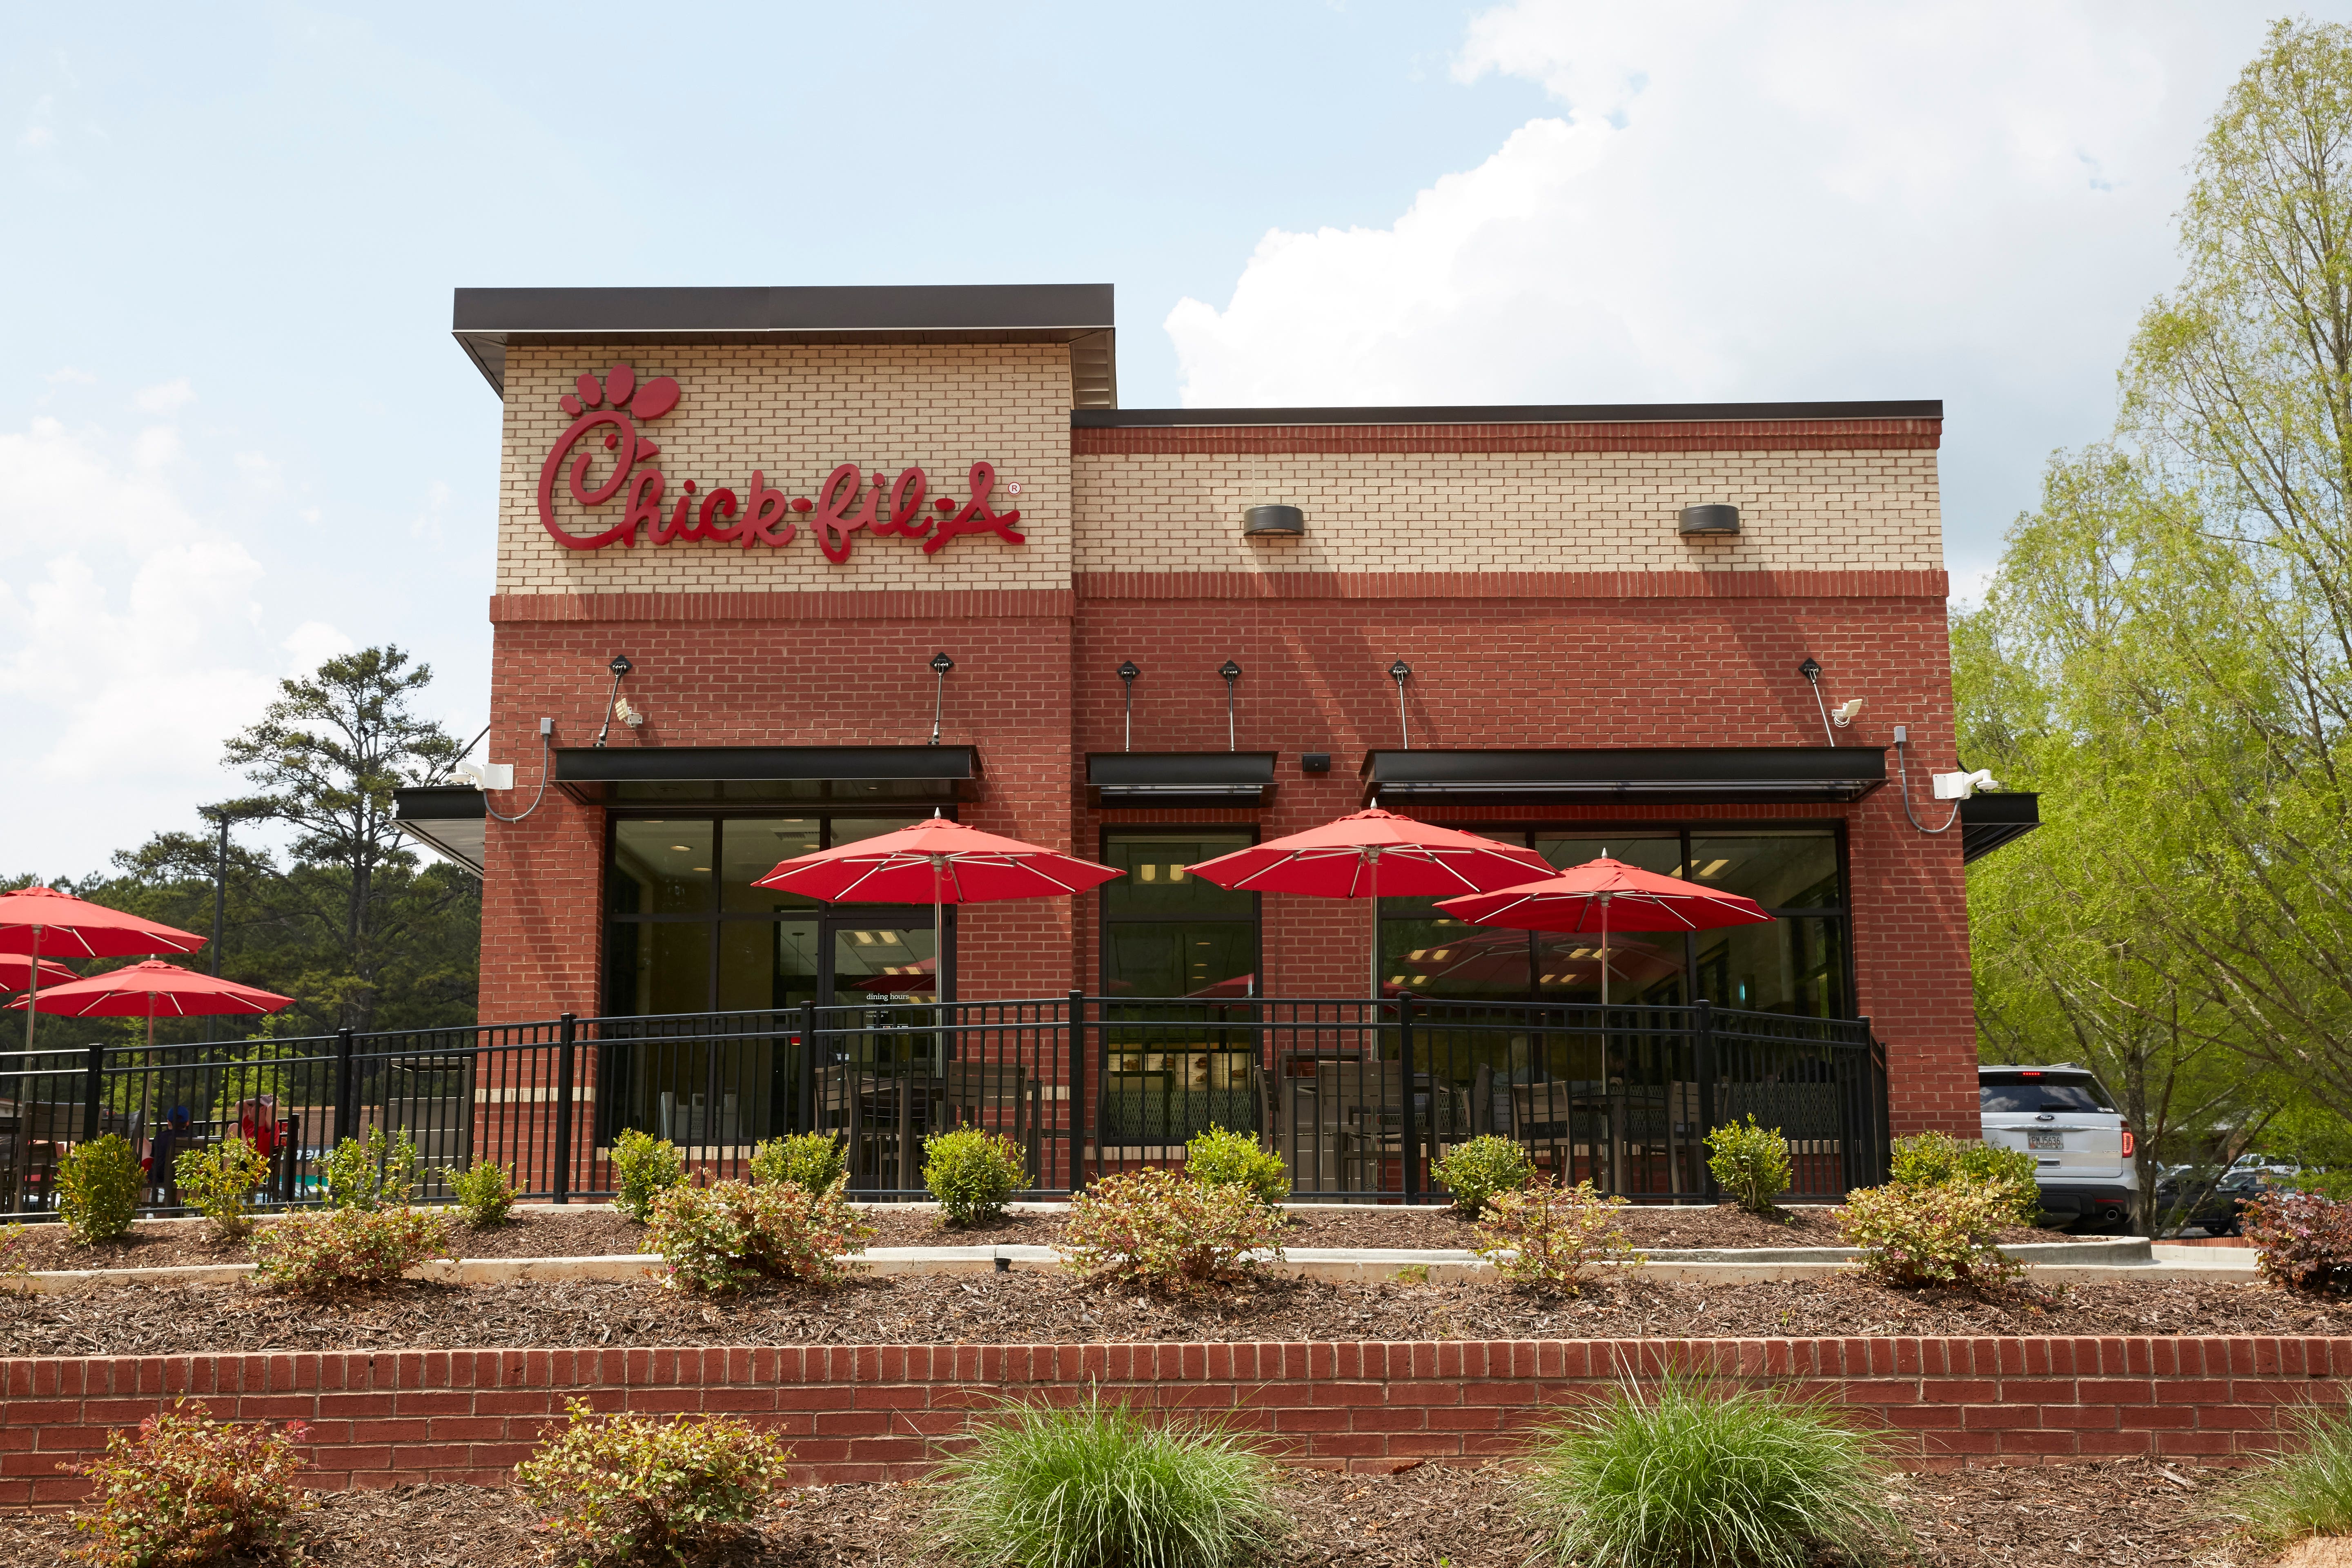 US fast-food giant Chick-fil-A will launch in the UK (Chick-fil-A/PA)